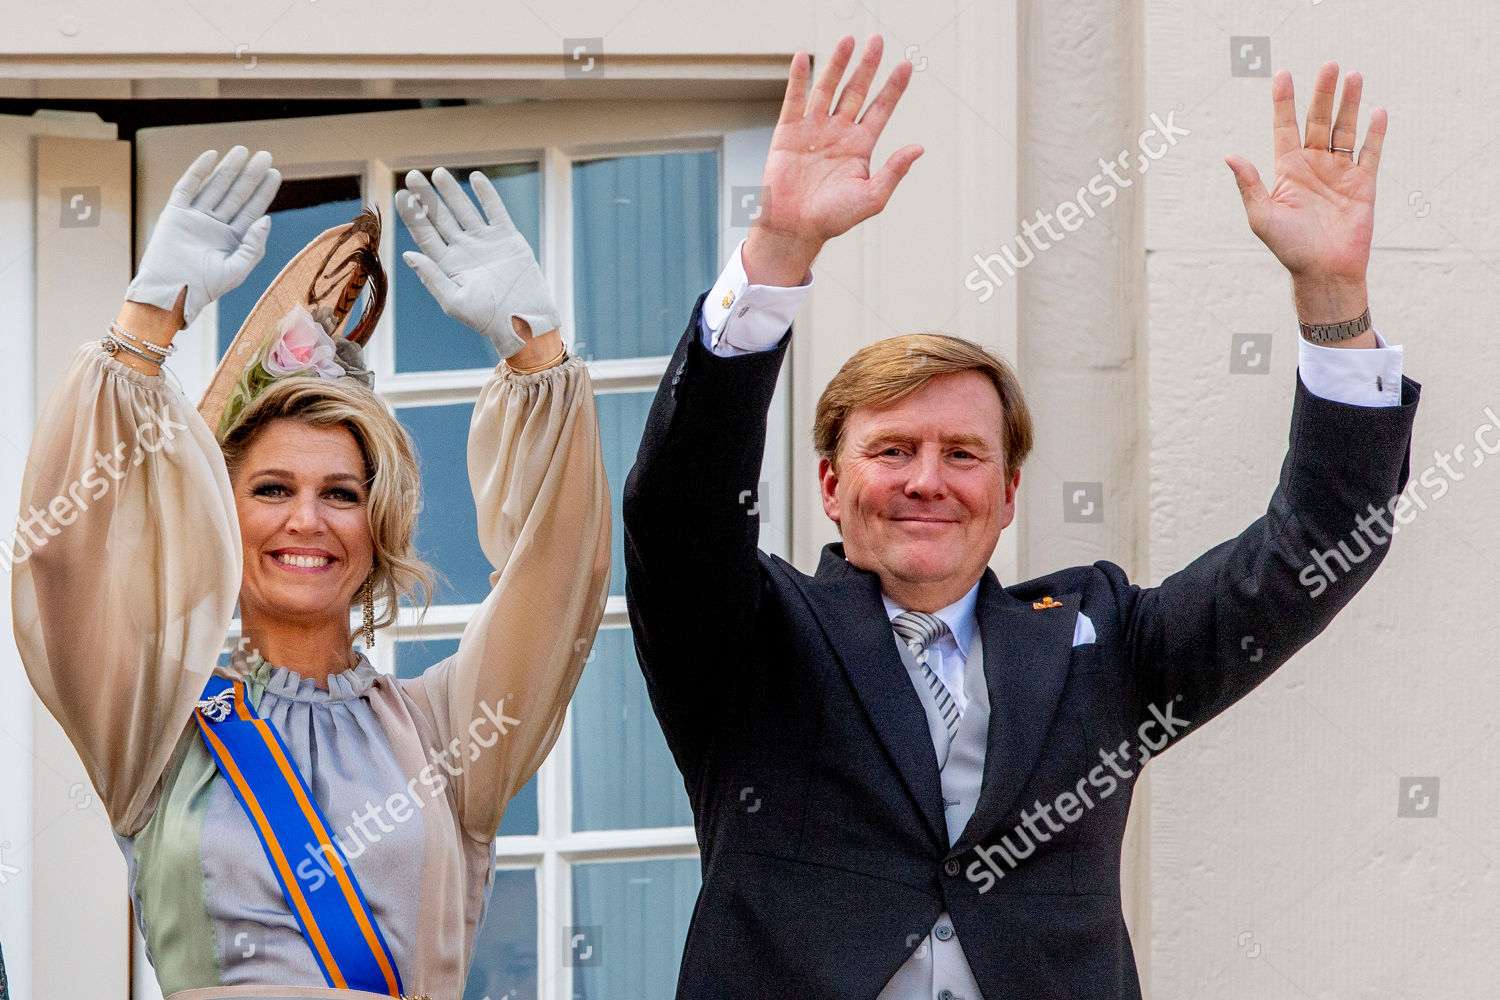 opening-of-the-parliamentary-season-the-hague-the-netherlands-shutterstock-editorial-9885898ah.jpg